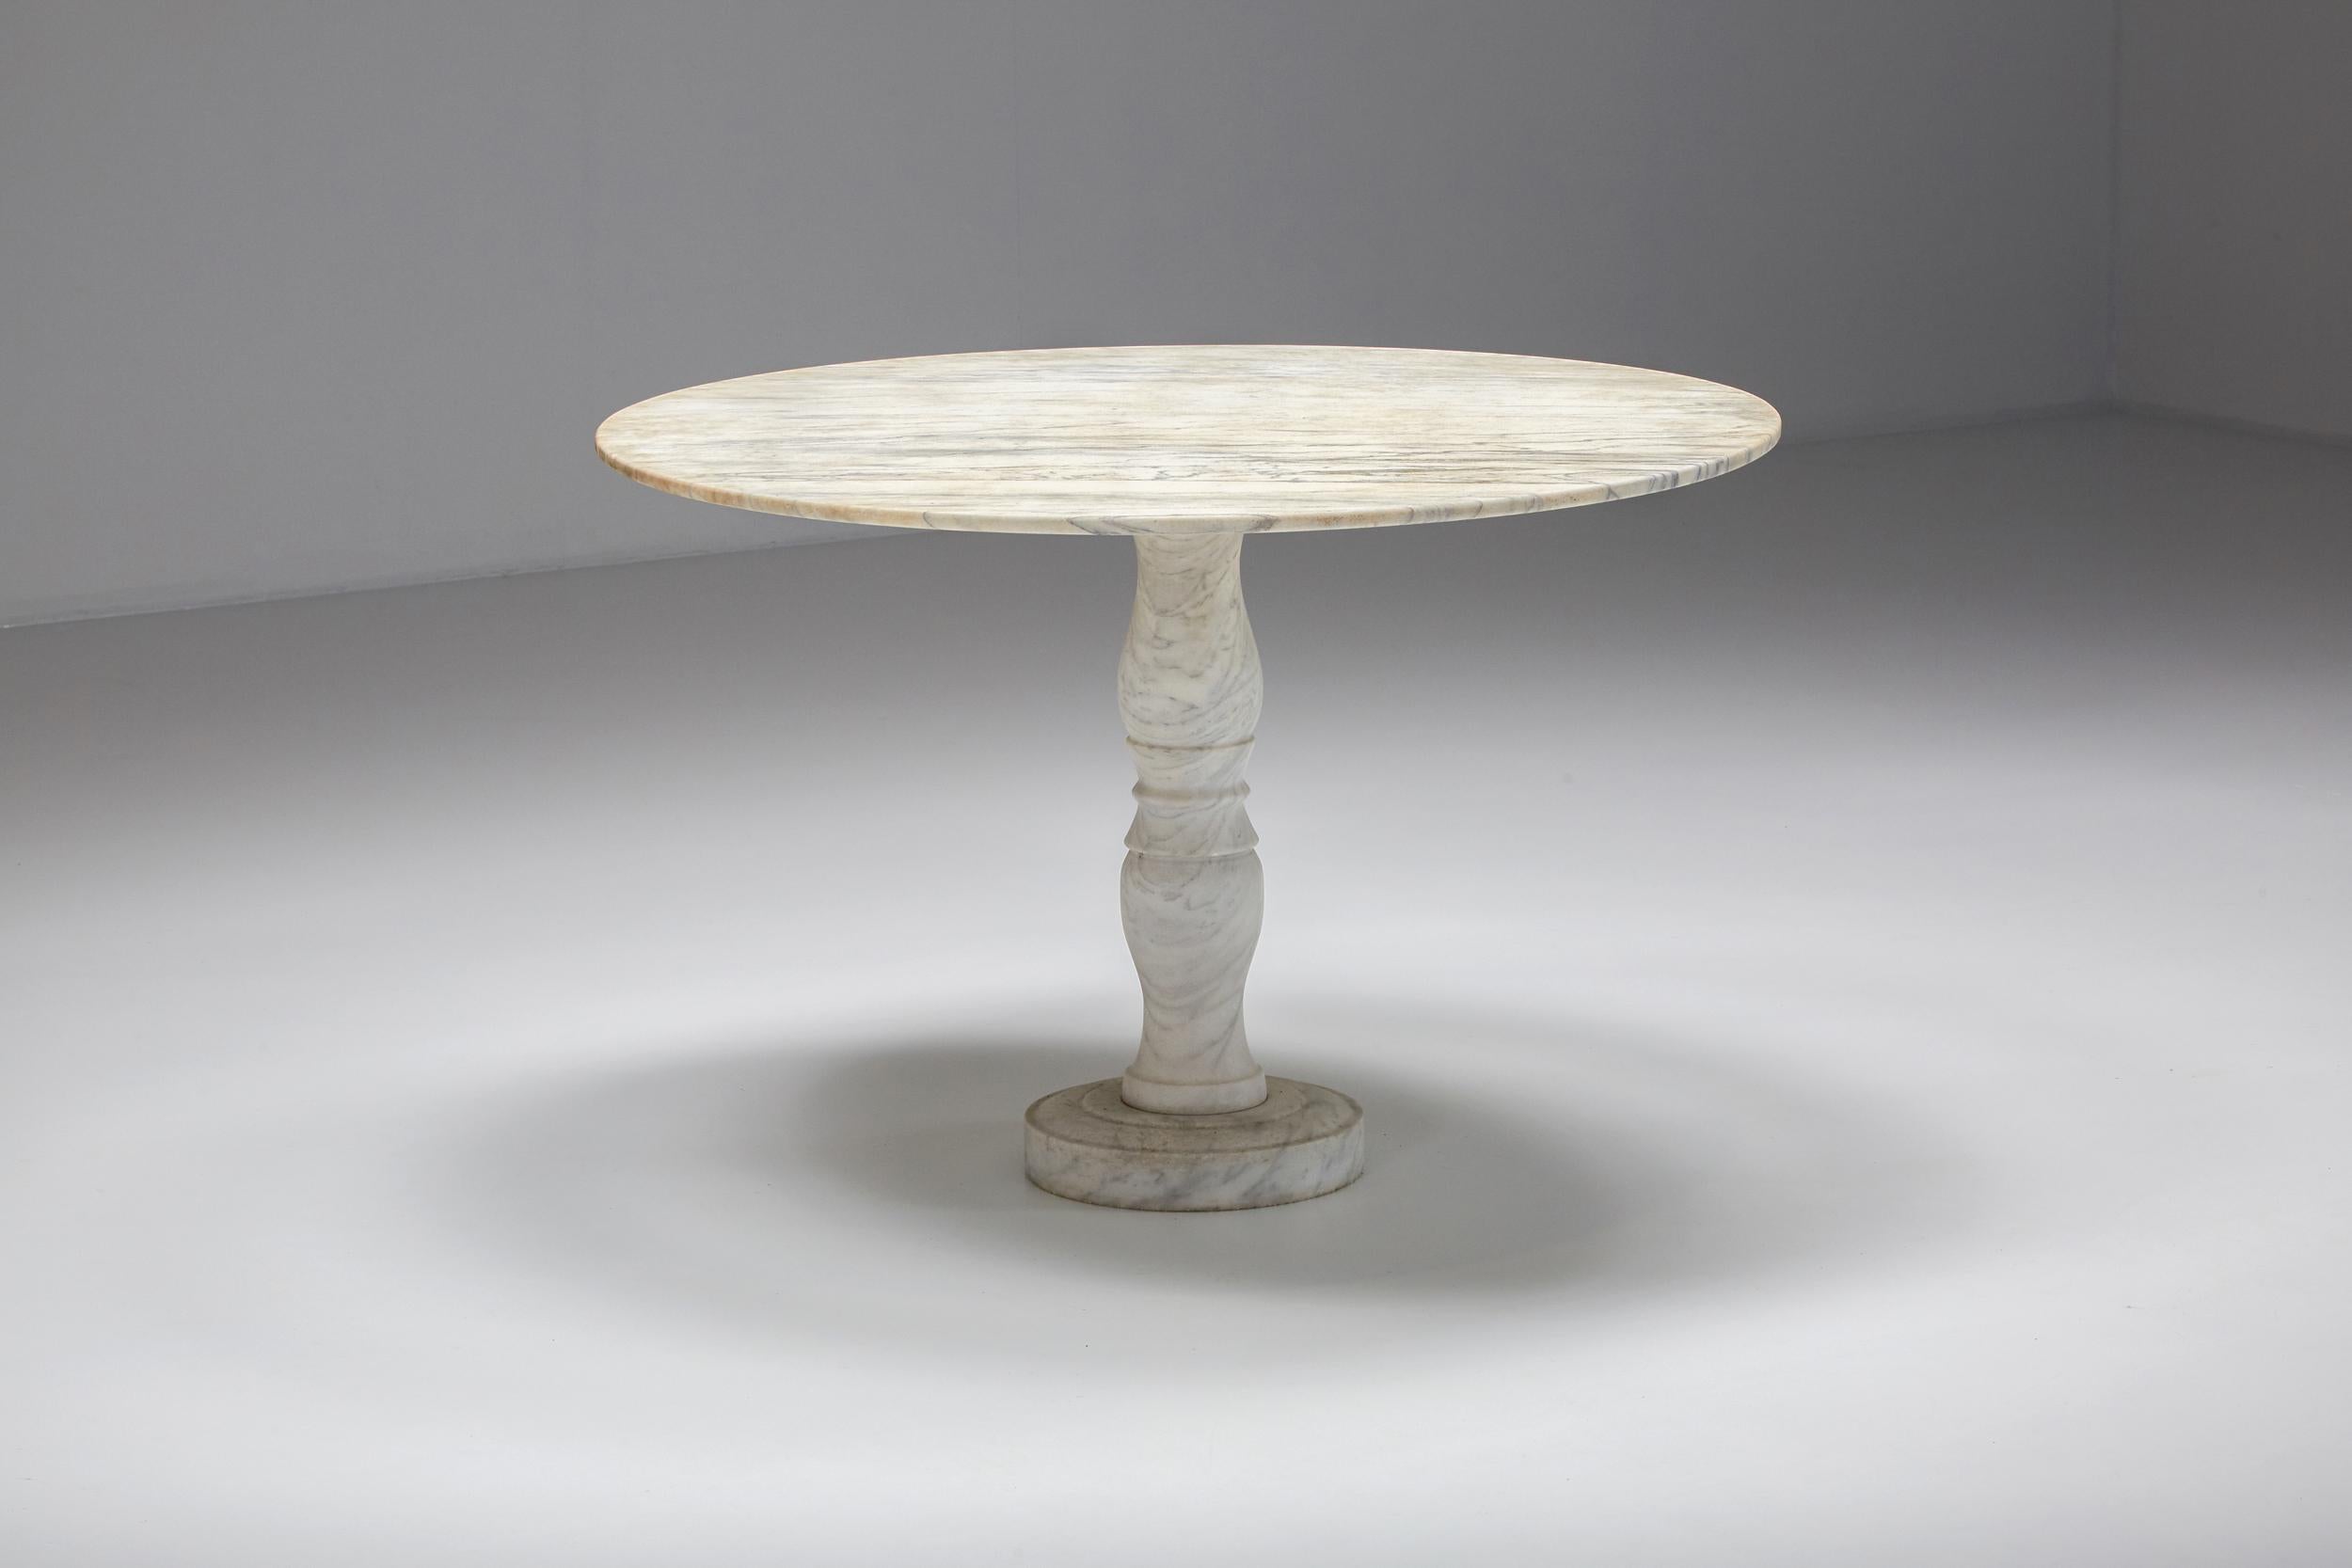 Mangiarotti style; Carrara marble; dining Table; Garden Table; Italian craft, 1950's; Garden Furniture; Garden set; 

Unique Carrara marble garden table. This elegant table adds value to a more rustic-looking garden. Can also be used indoors. In the